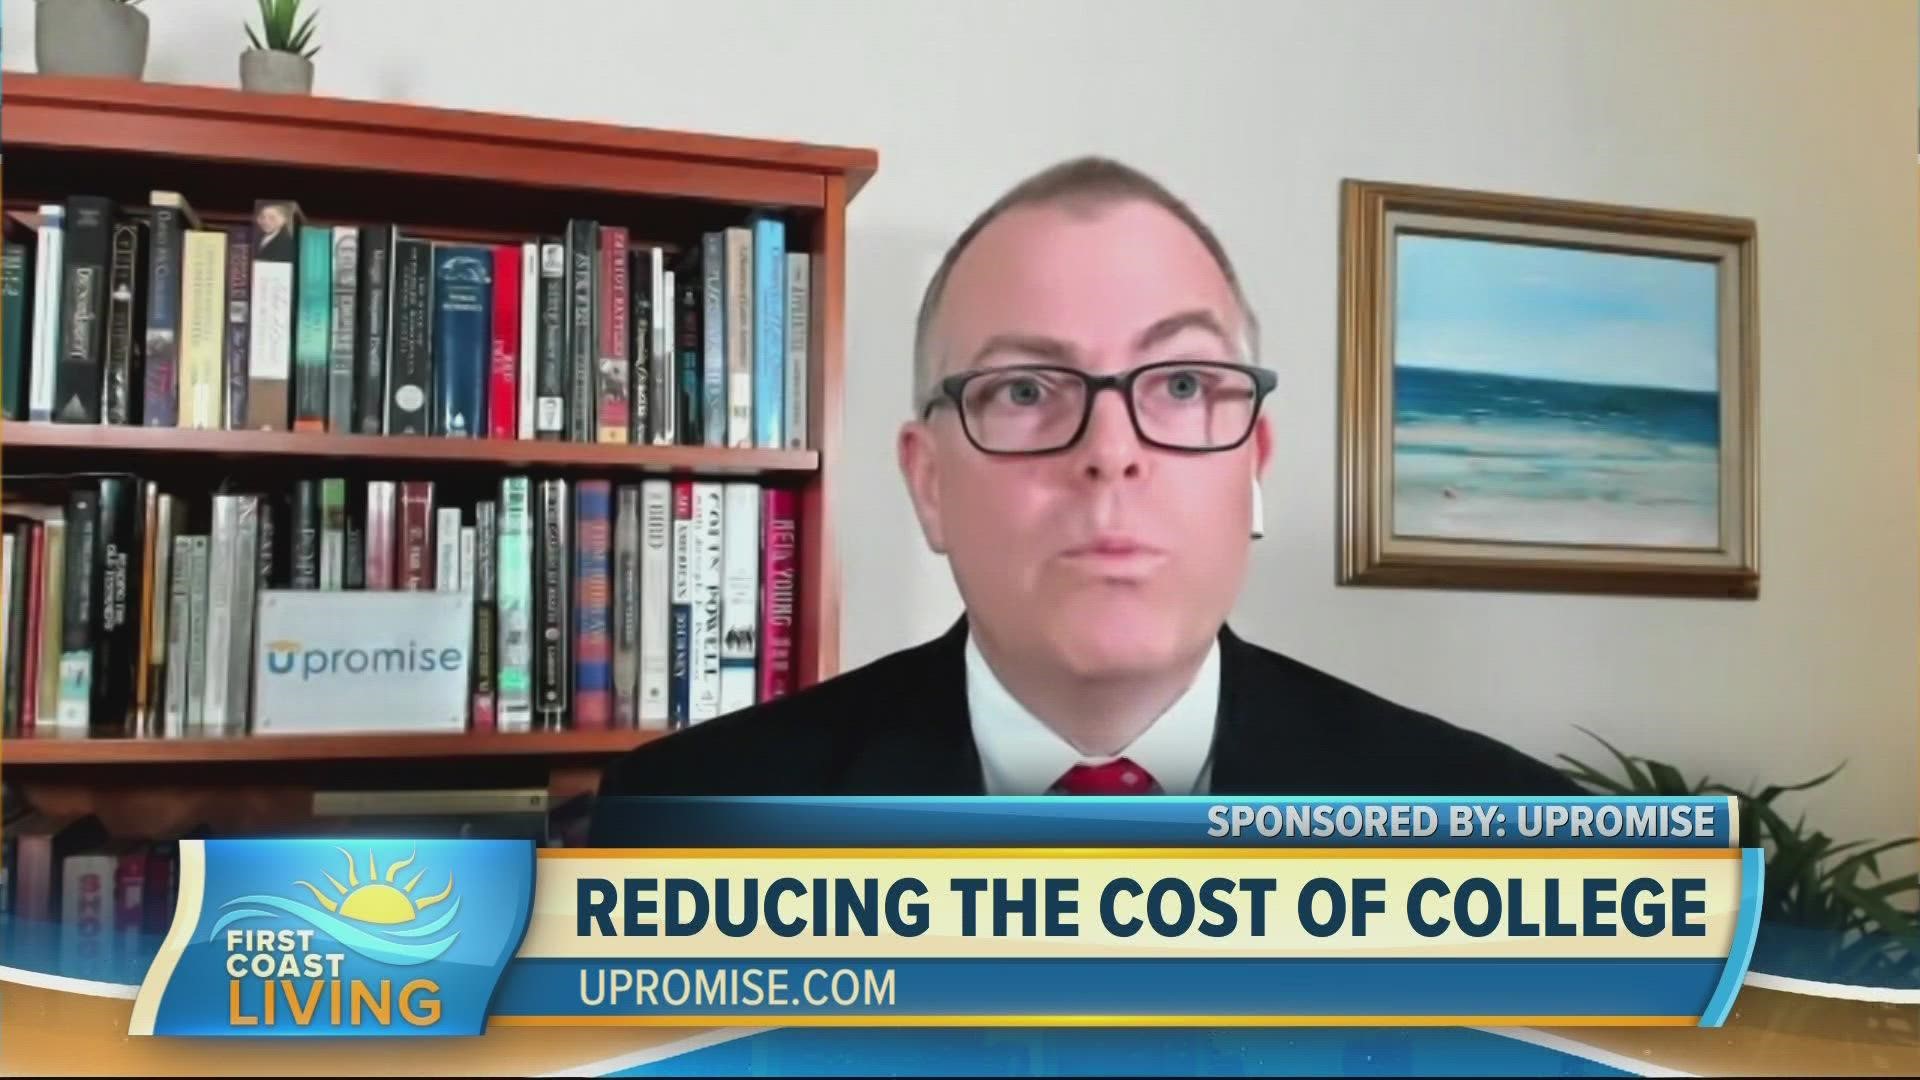 Derek DeLorenzo our education saving expert and senior director with UPROMISE shares tips on how to make college more affordable.